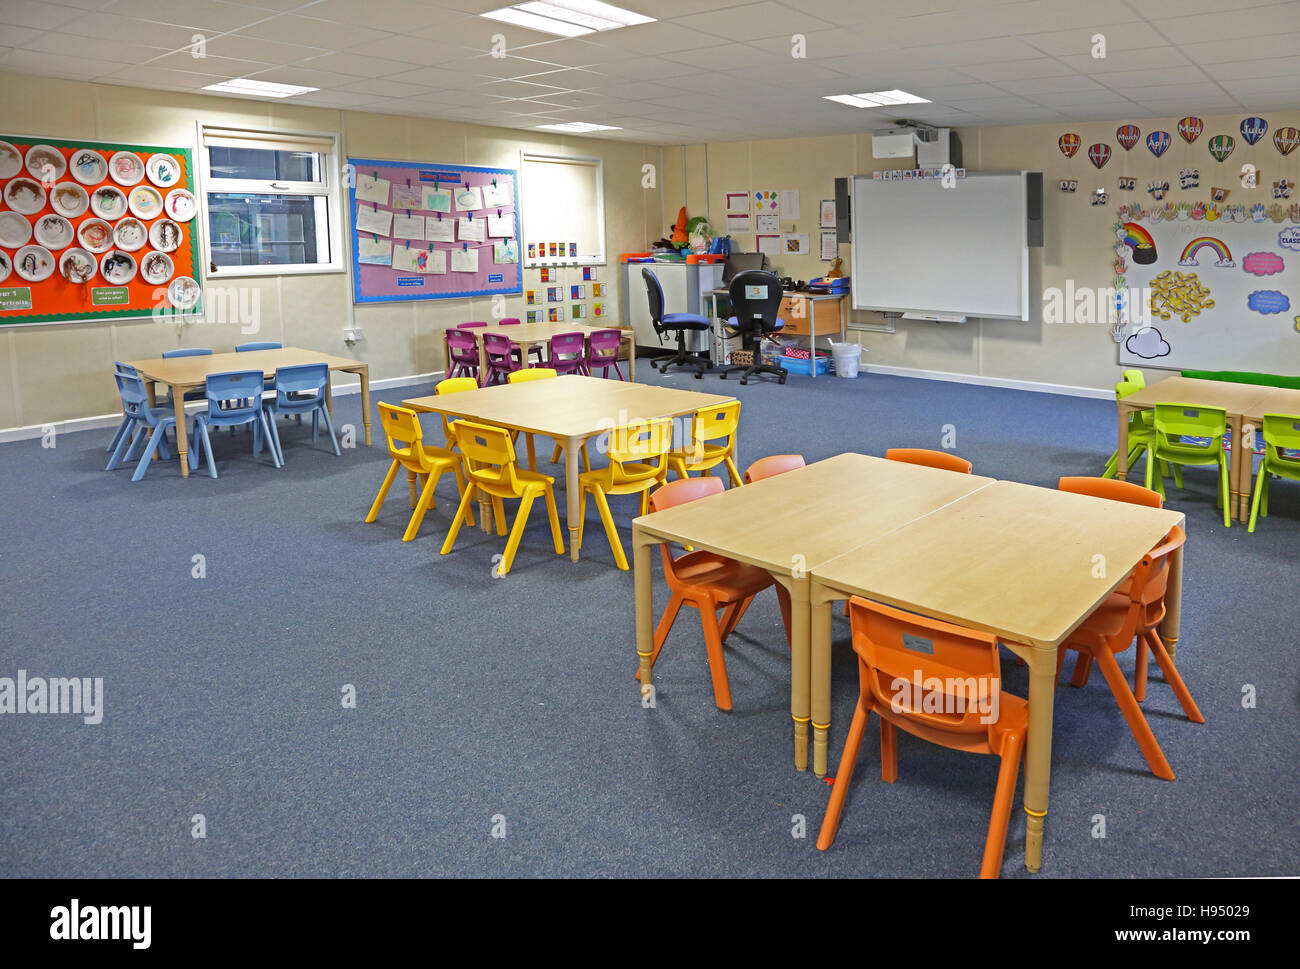 Brightly coloured interior of a modern year 1 school classroom showing tables, chairs and artwork on walls Stock Photo